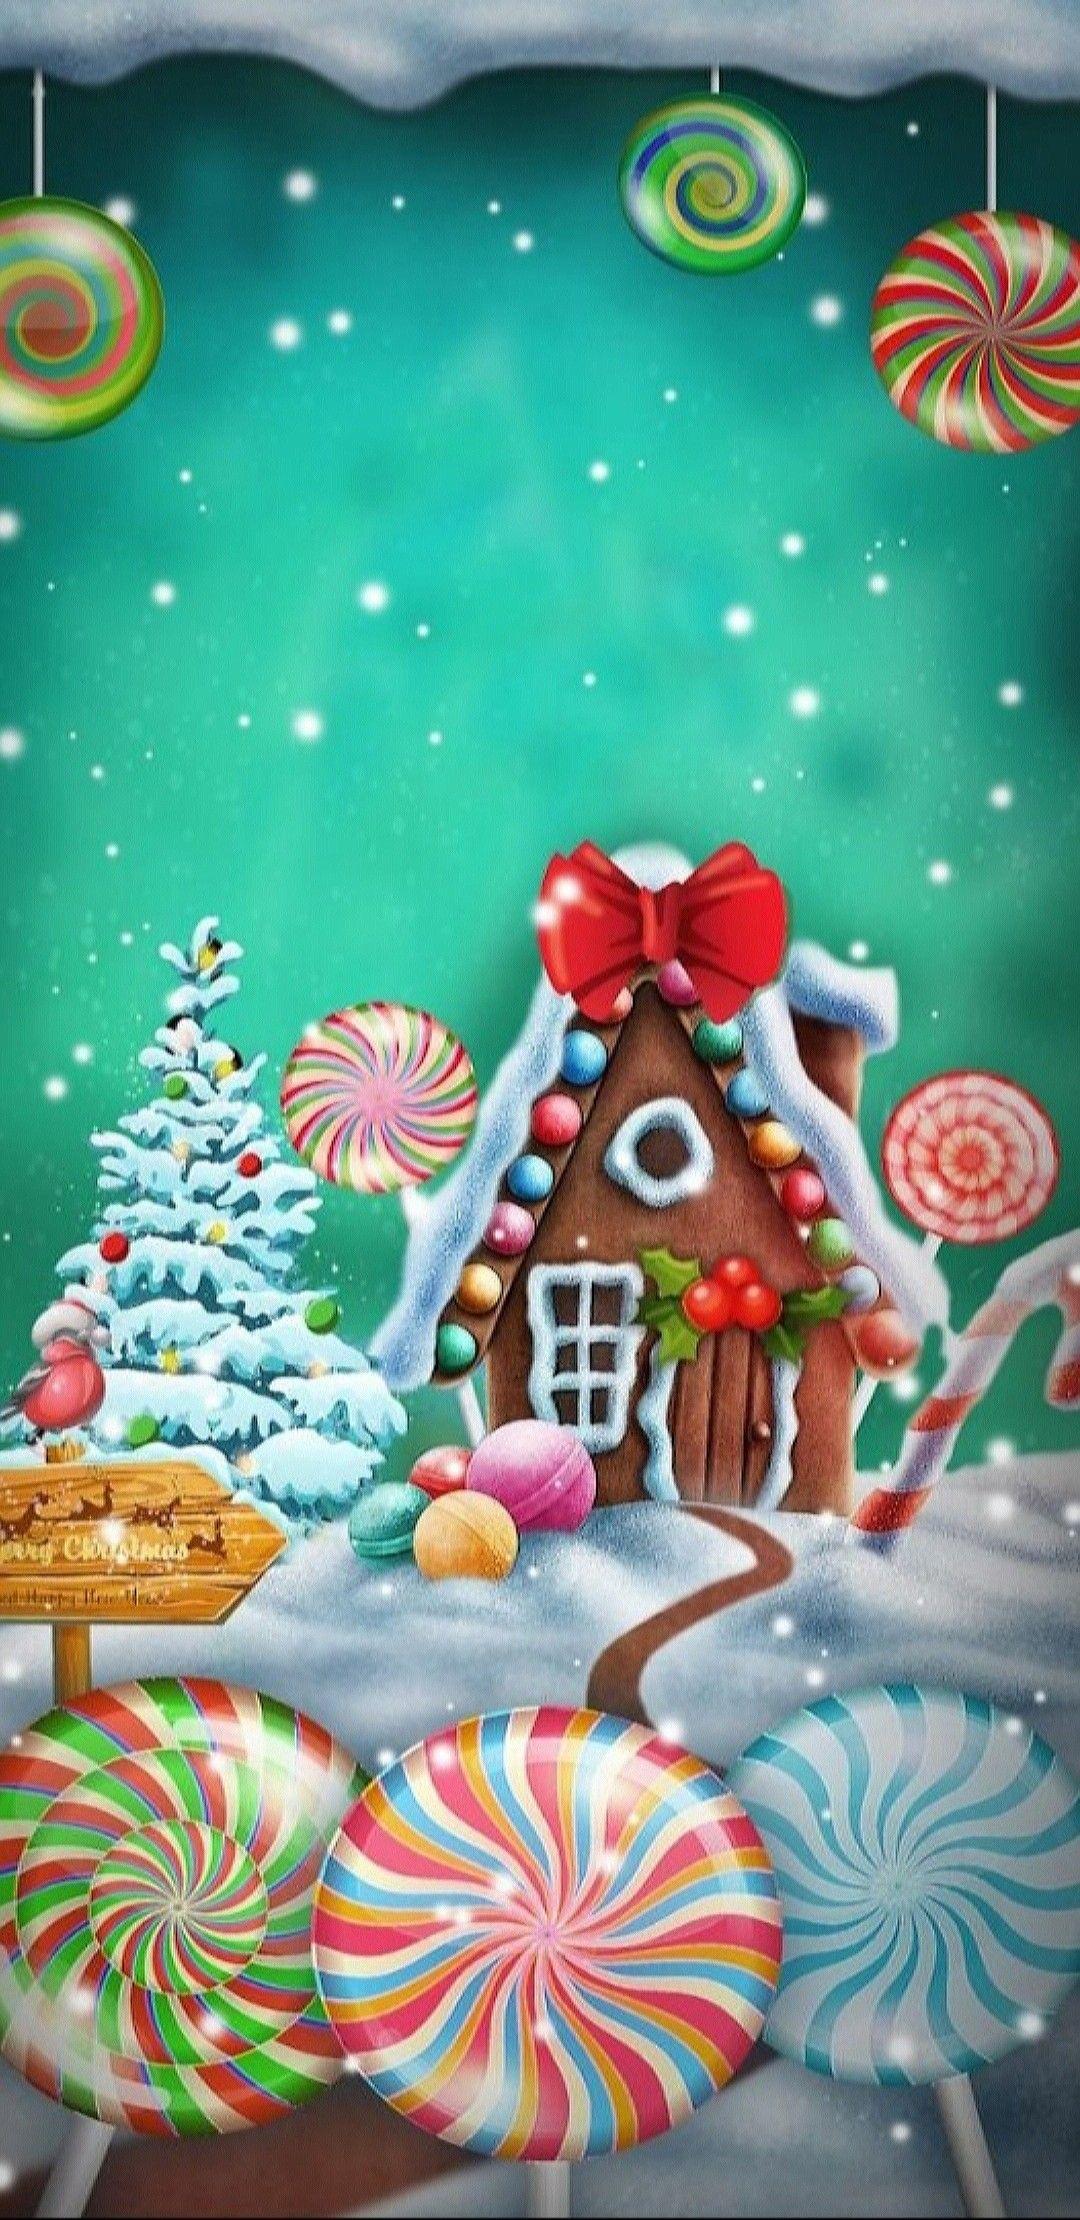 Gingerbread House Wallpapers - Wallpaper Cave